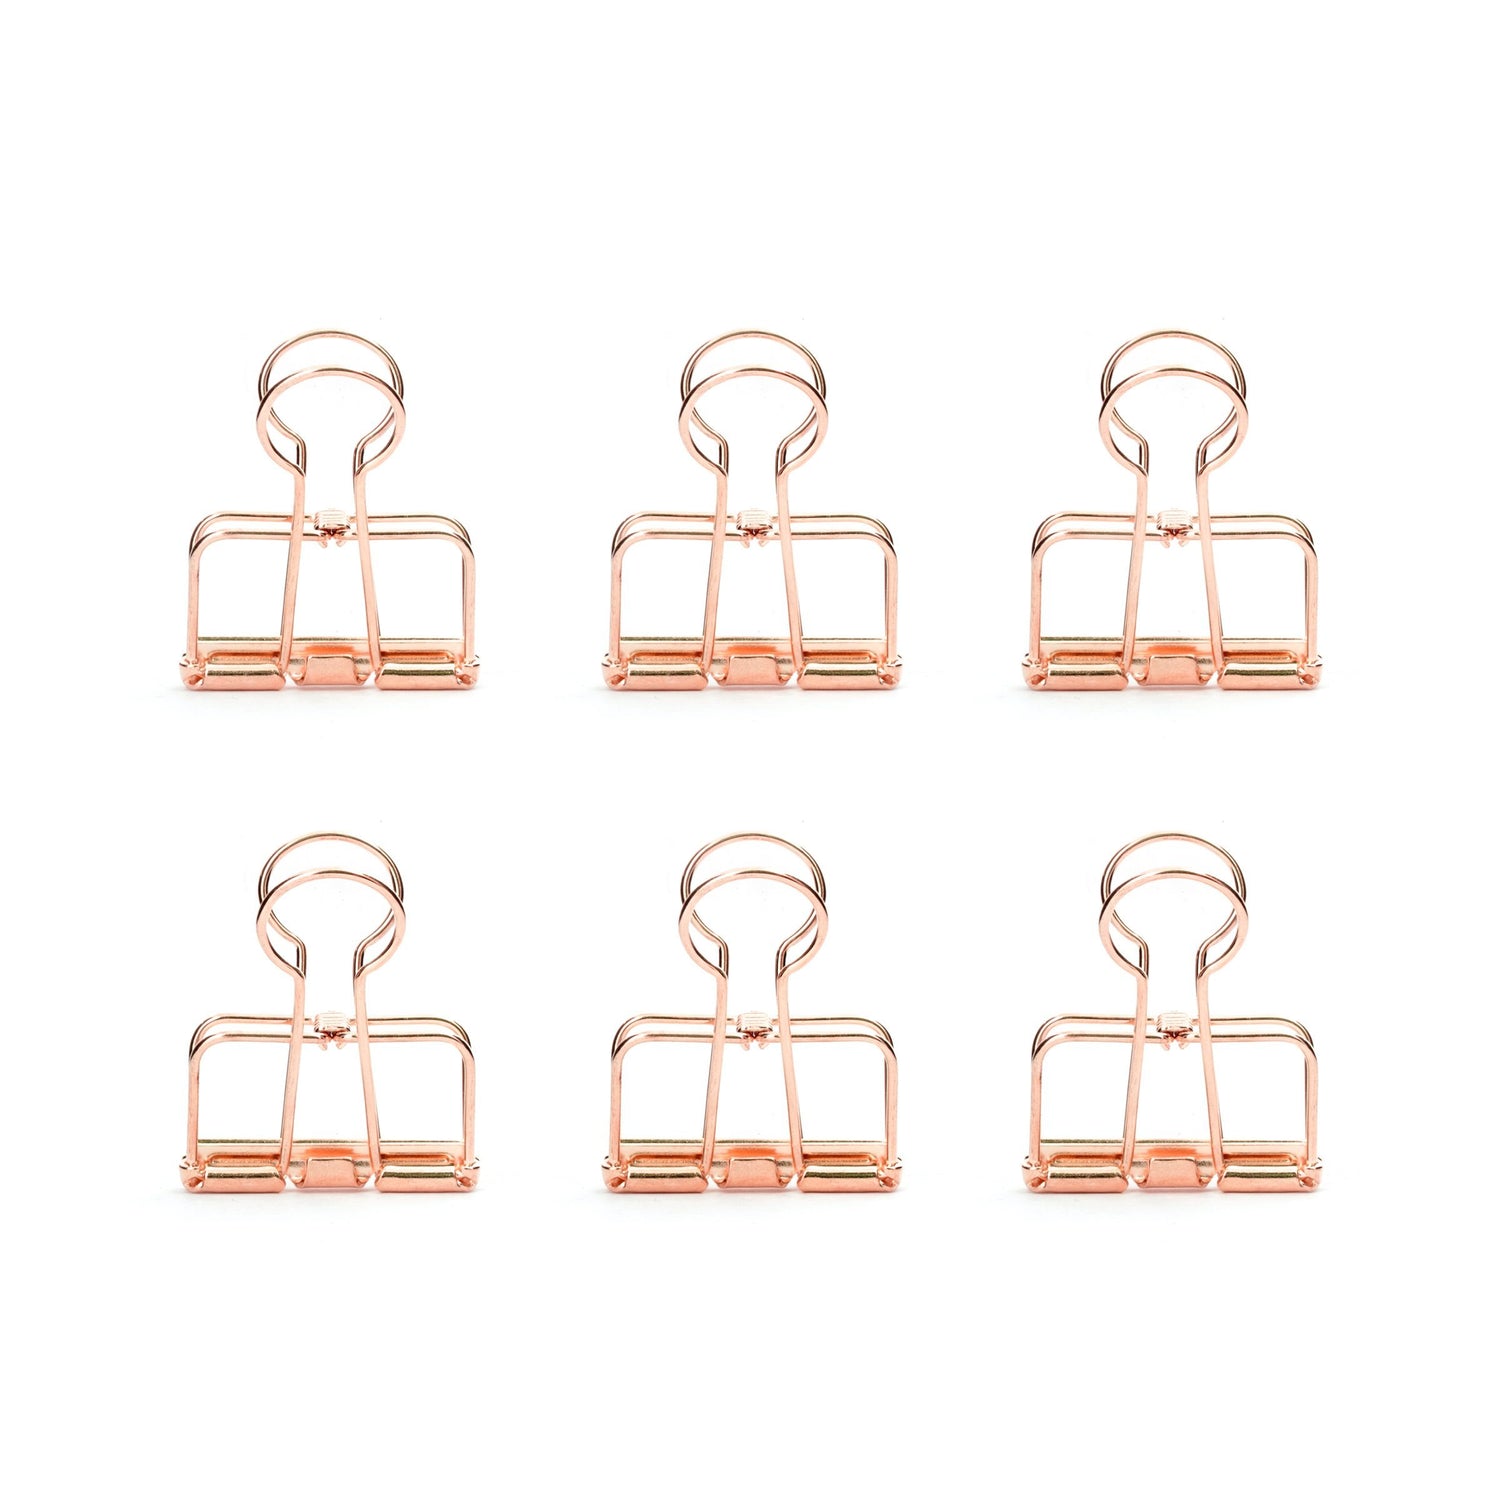 Copper Wire Clips Set Of 6